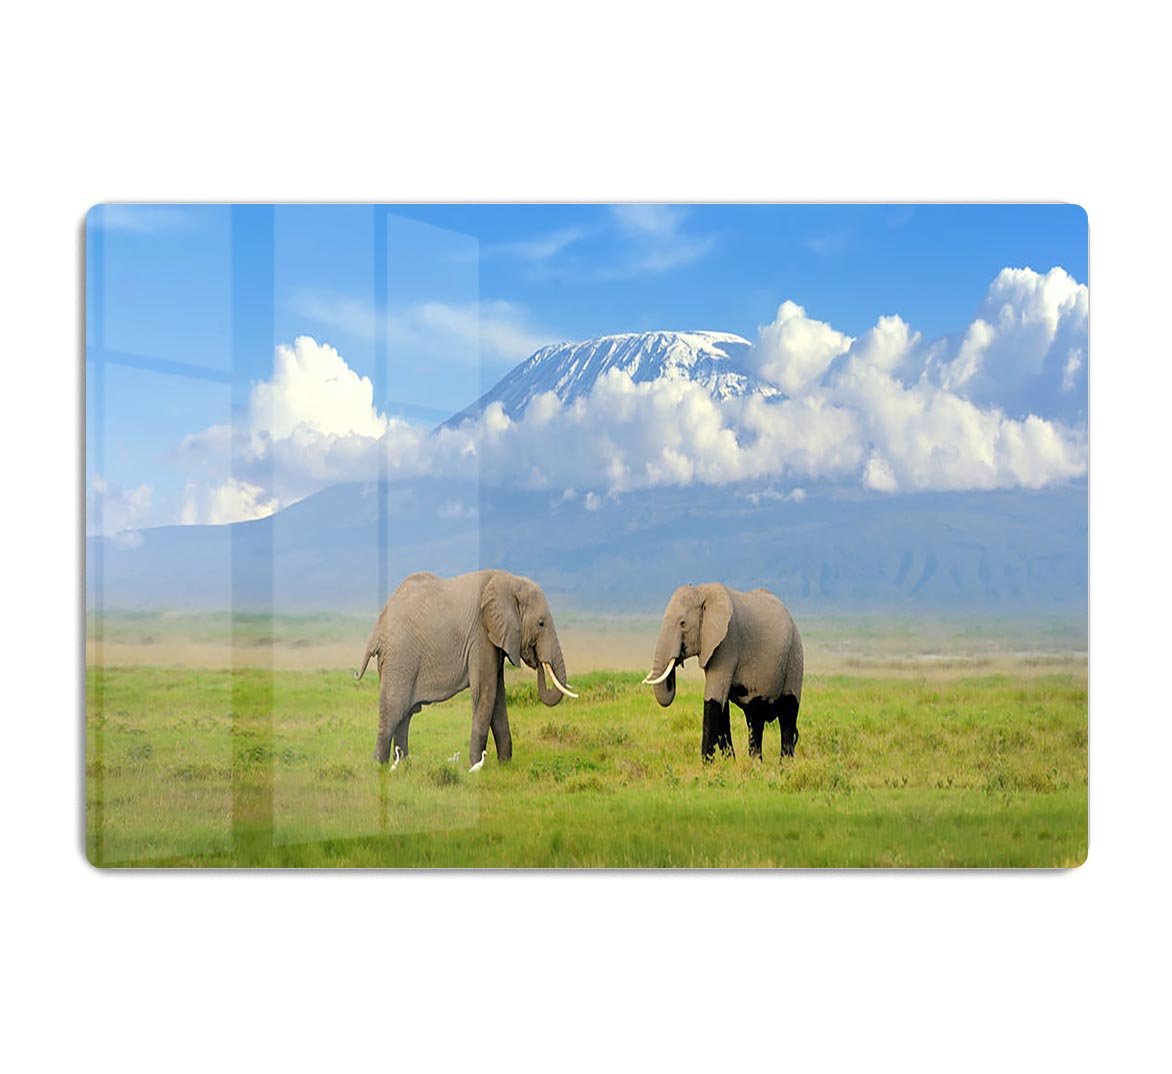 Elephant with Mount Kilimanjaro in the background HD Metal Print - Canvas Art Rocks - 1